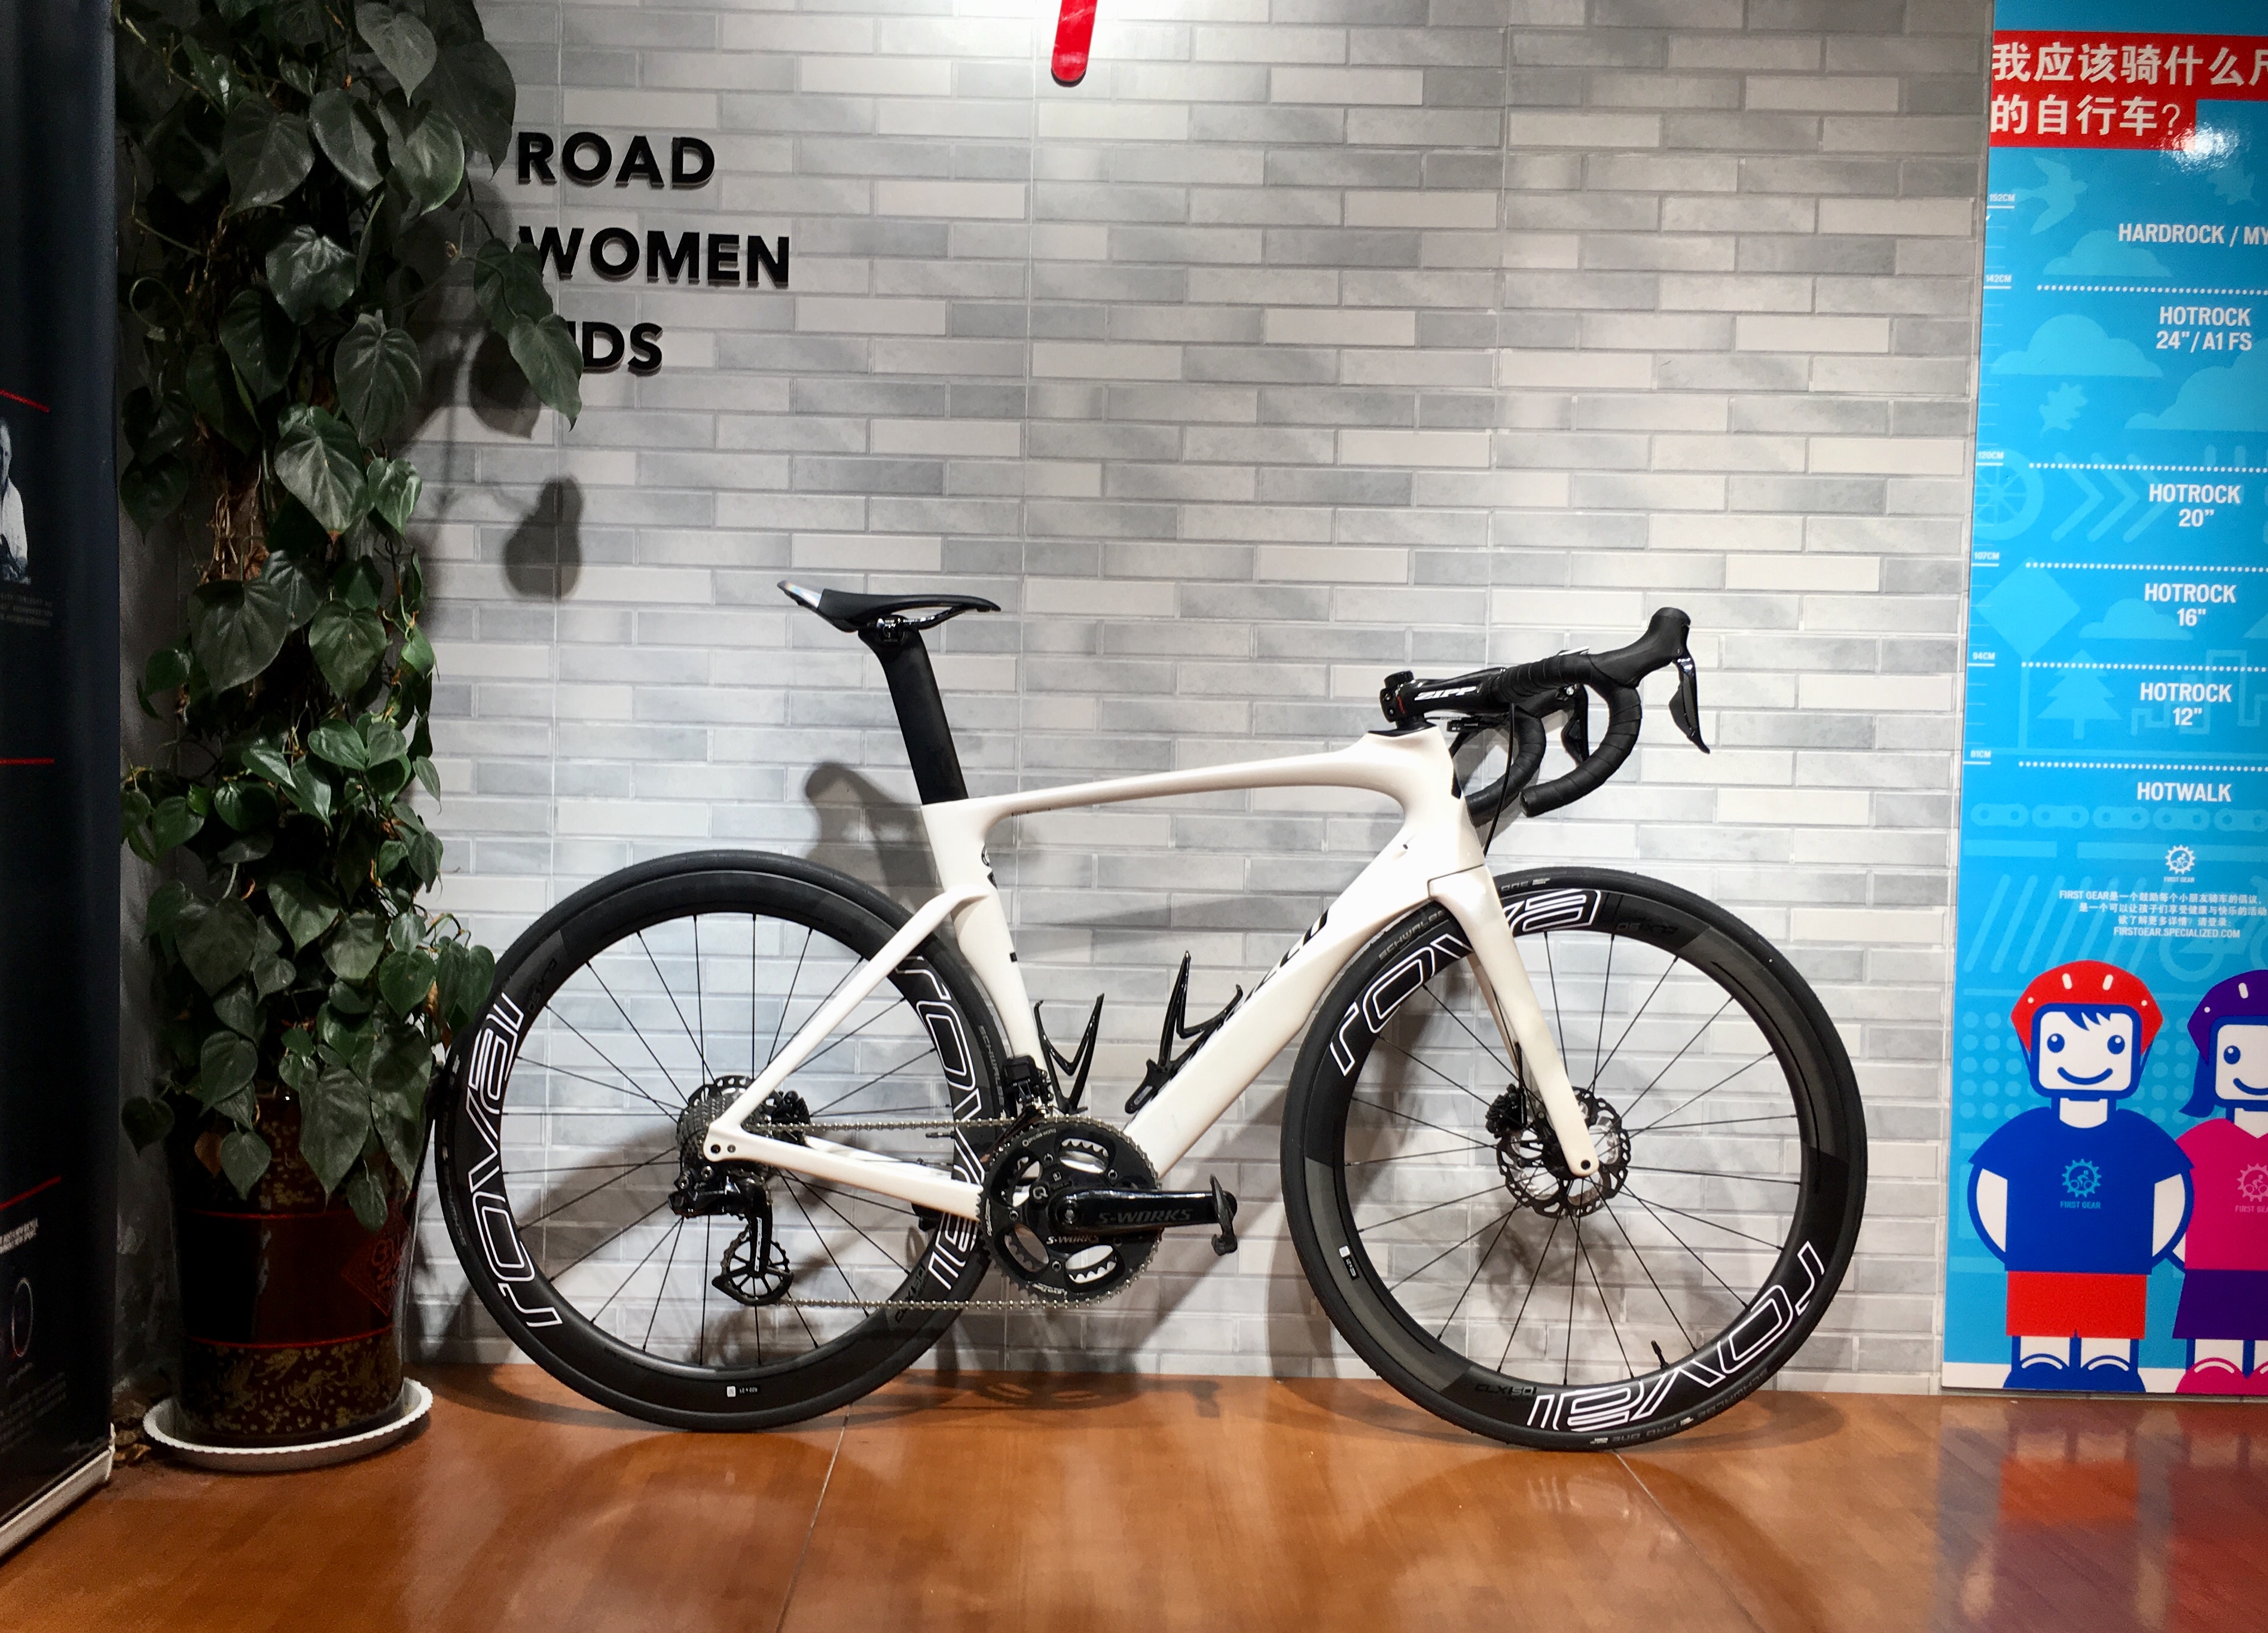 A New S-Works Upgrade for theВ VengeвЂ¦